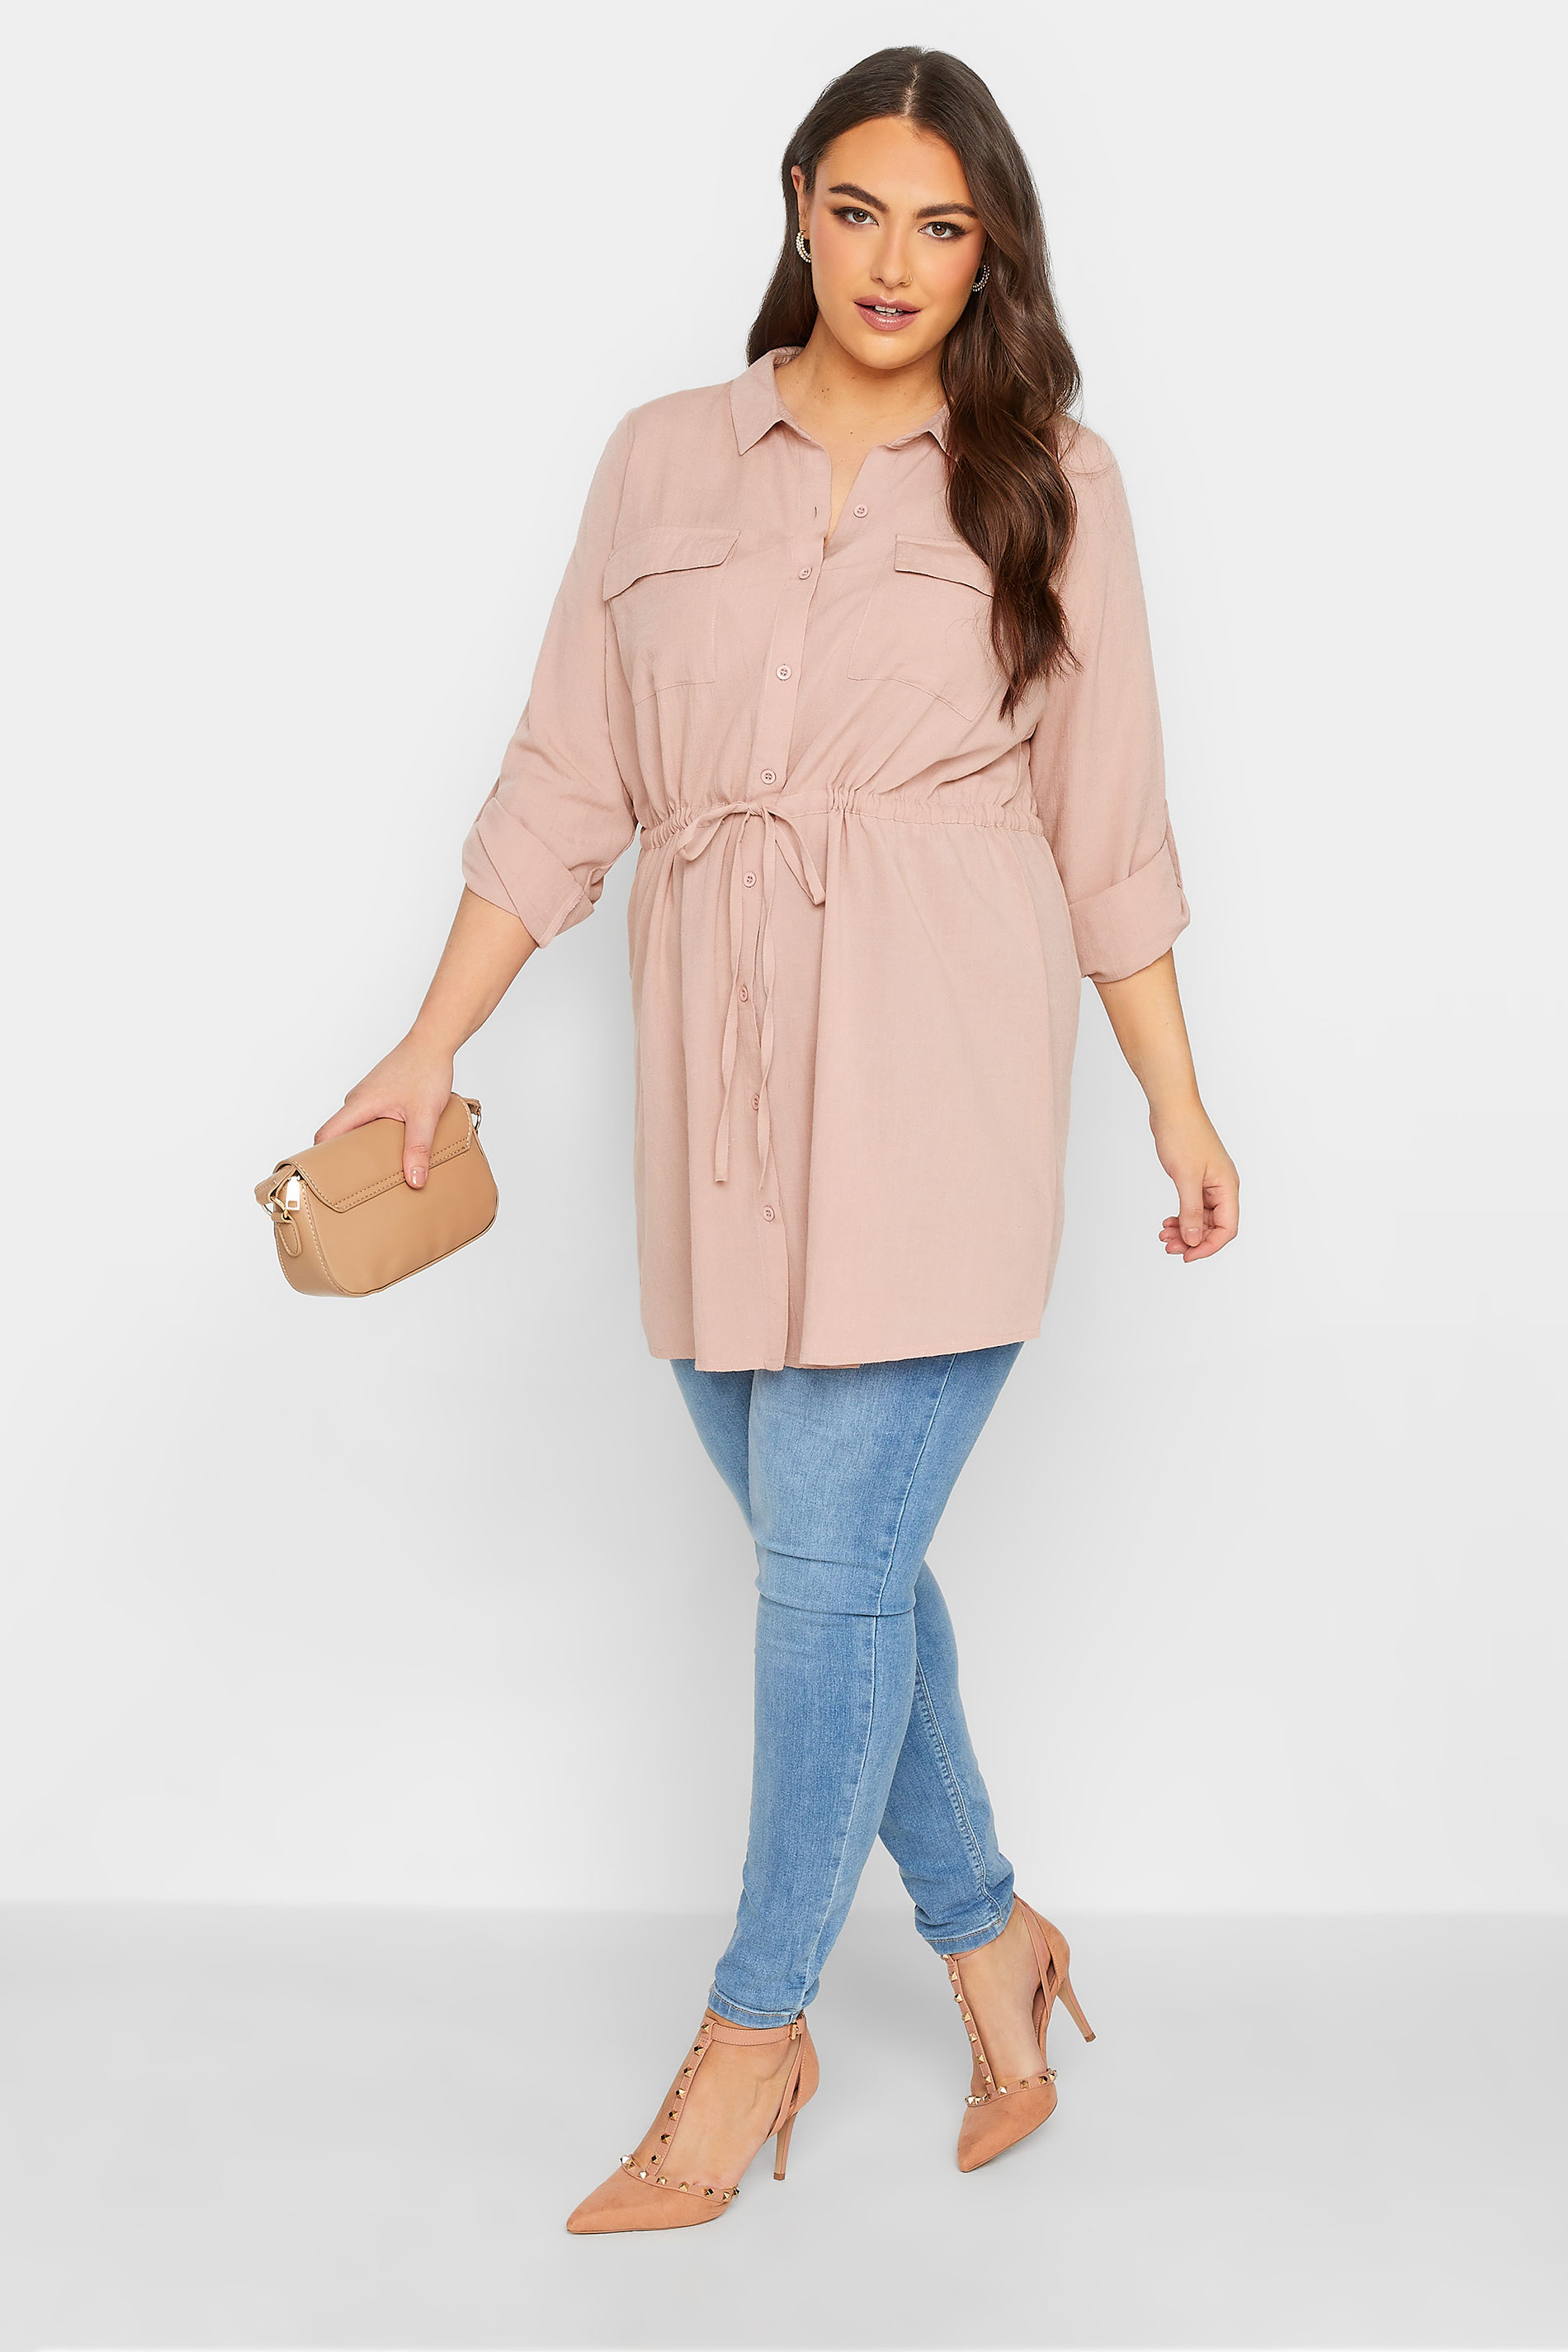 YOURS Plus Size Blush Pink Utility Tunic Linen Shirt | Yours Clothing 2